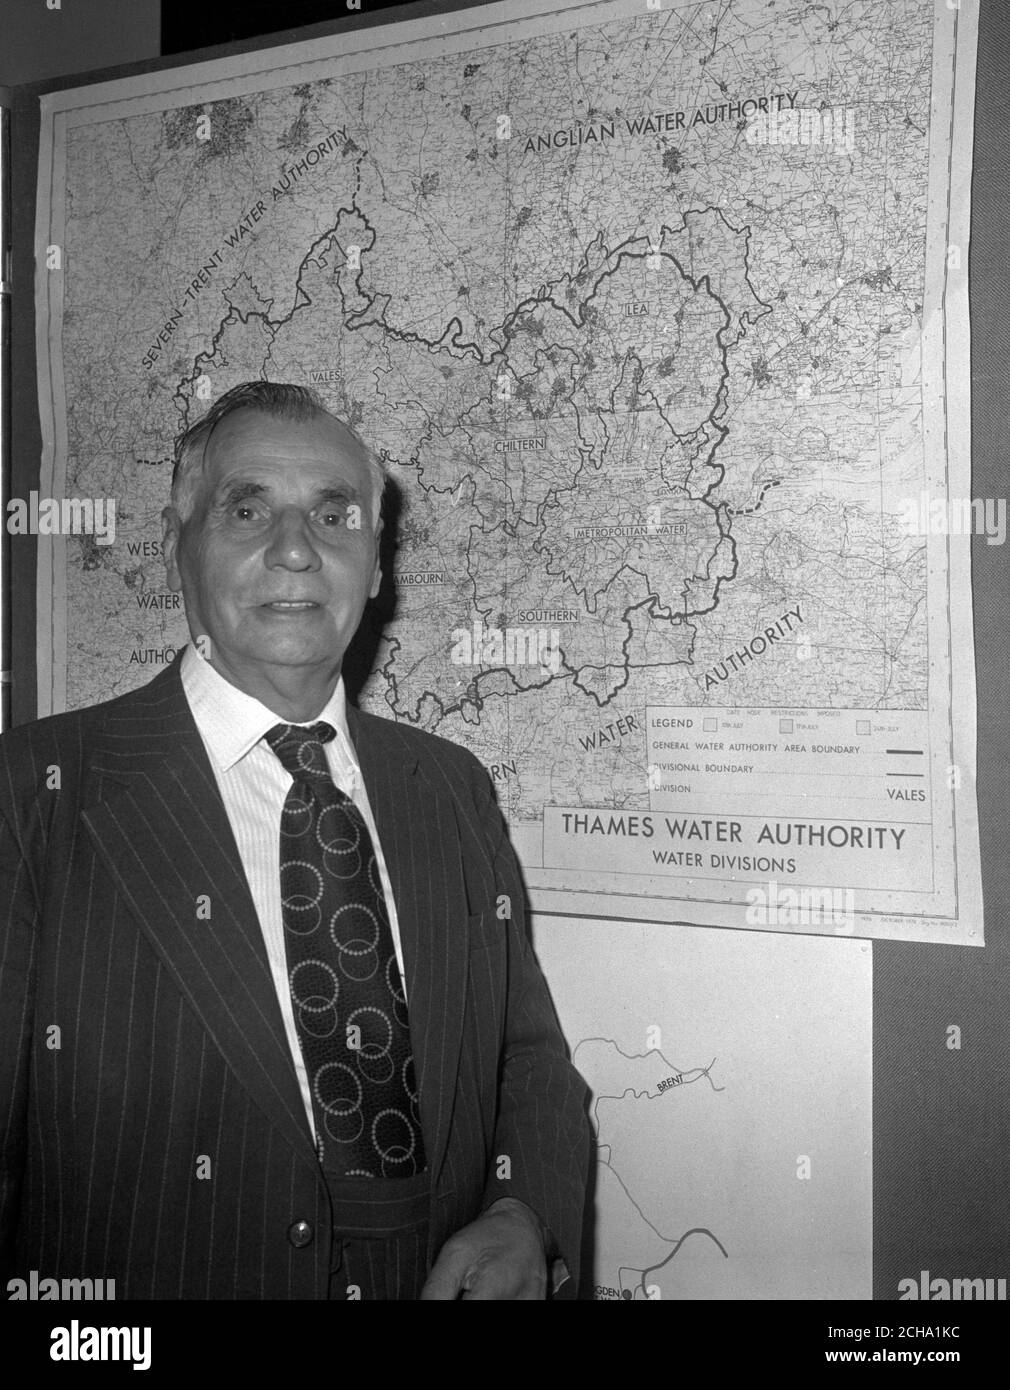 Tom W. Newson, chairman of Thames Water Authority, during a Water Management Committee meeting in New River Head, London. Items to be discussed include reports on the regional water situation and the Drought Act 1976. Stock Photo